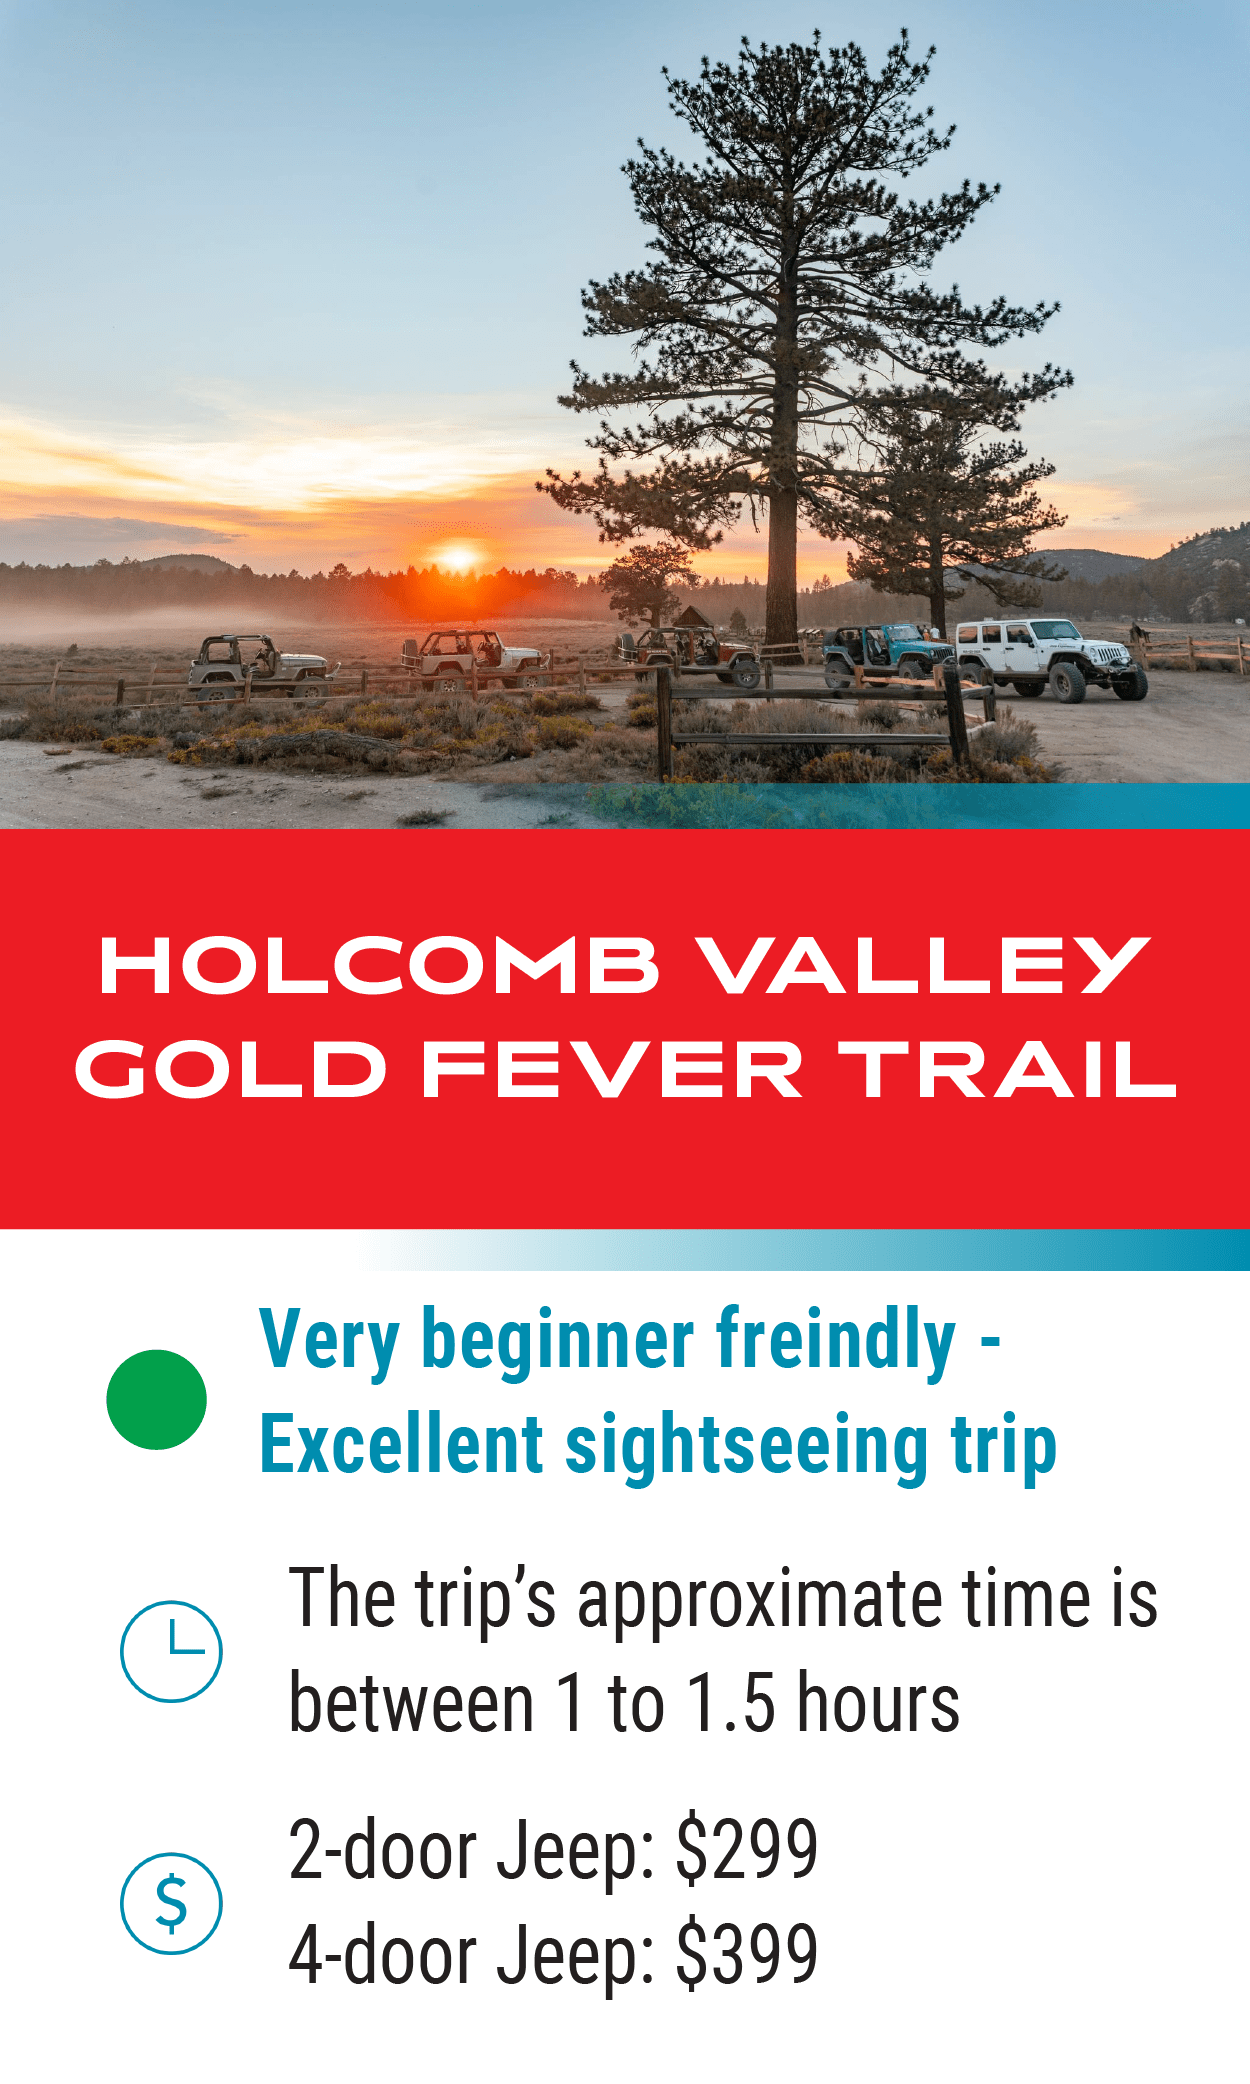 Holcomb Valley Gold Fever Trail